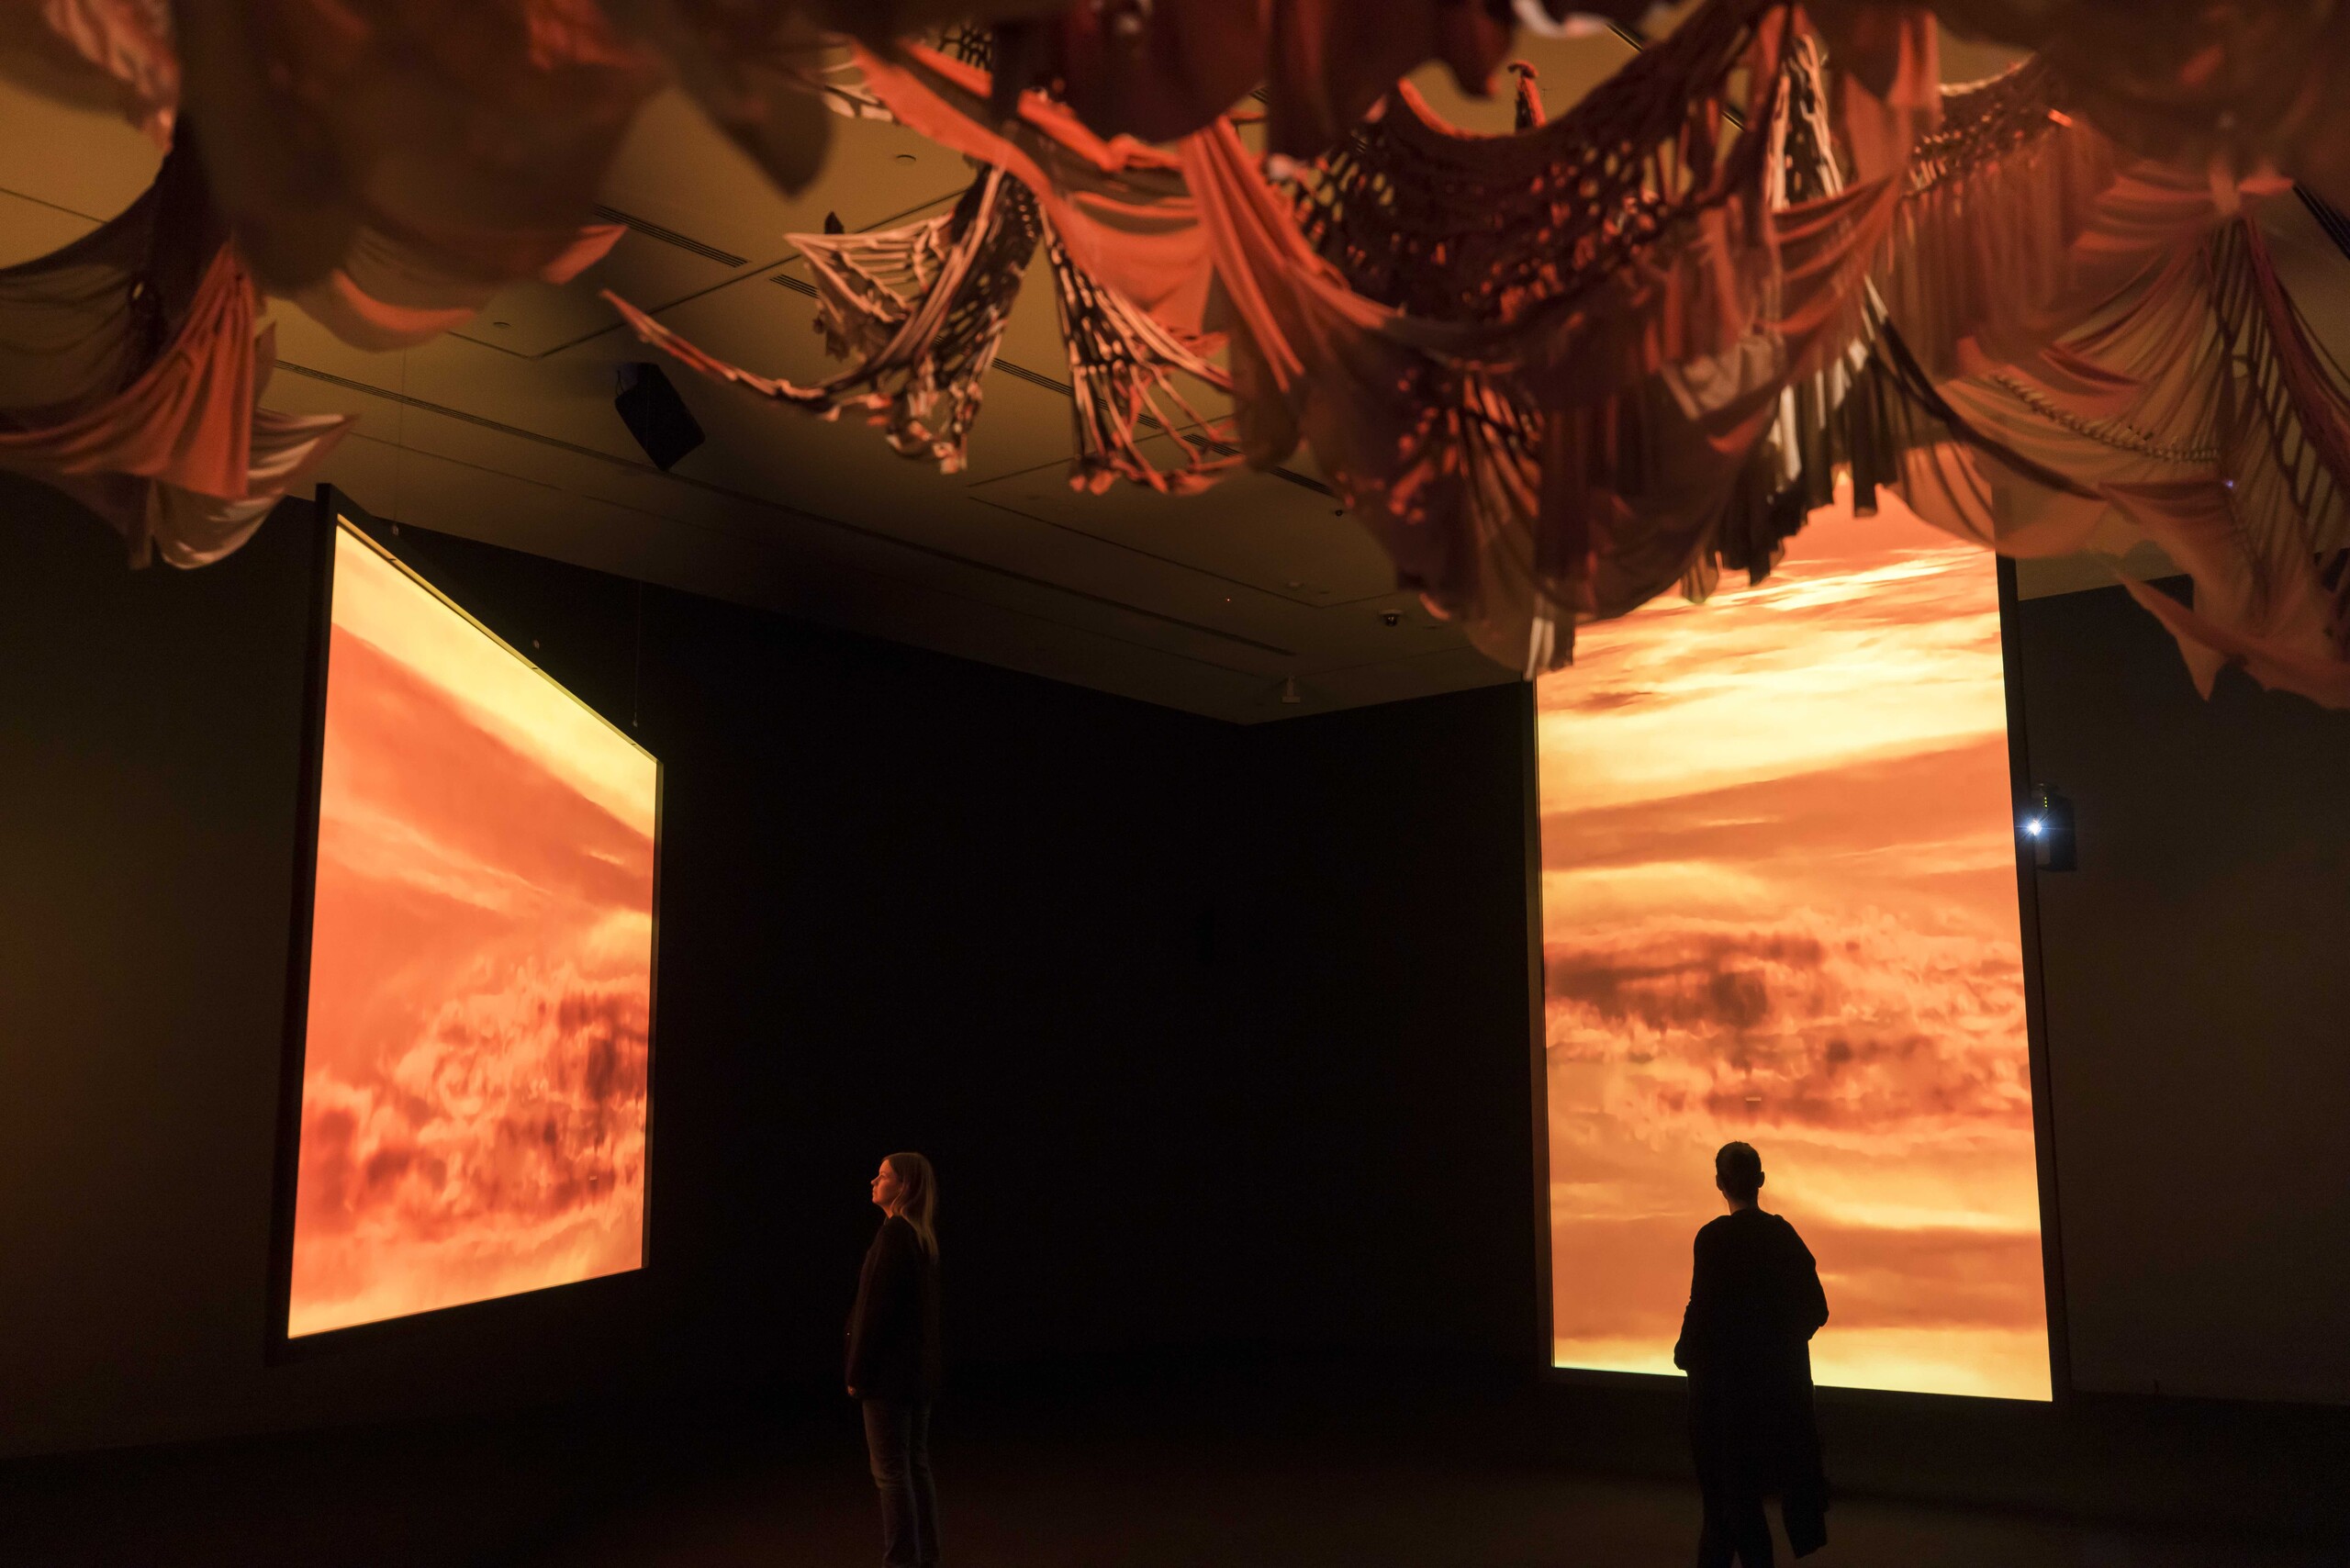 Club Ate (Justin Shoulder, Bhenji Ra, and collaborators), ANG IDOL KO / YOU ARE MY IDOL (detail), 2022, installation view, Ultra Unreal, Museum of Contemporary Art Australia, Sydney, 2022, 2-channel video, HD, colour, sound, fabric, image courtesy and © the artists, photograph: Anna Kučera